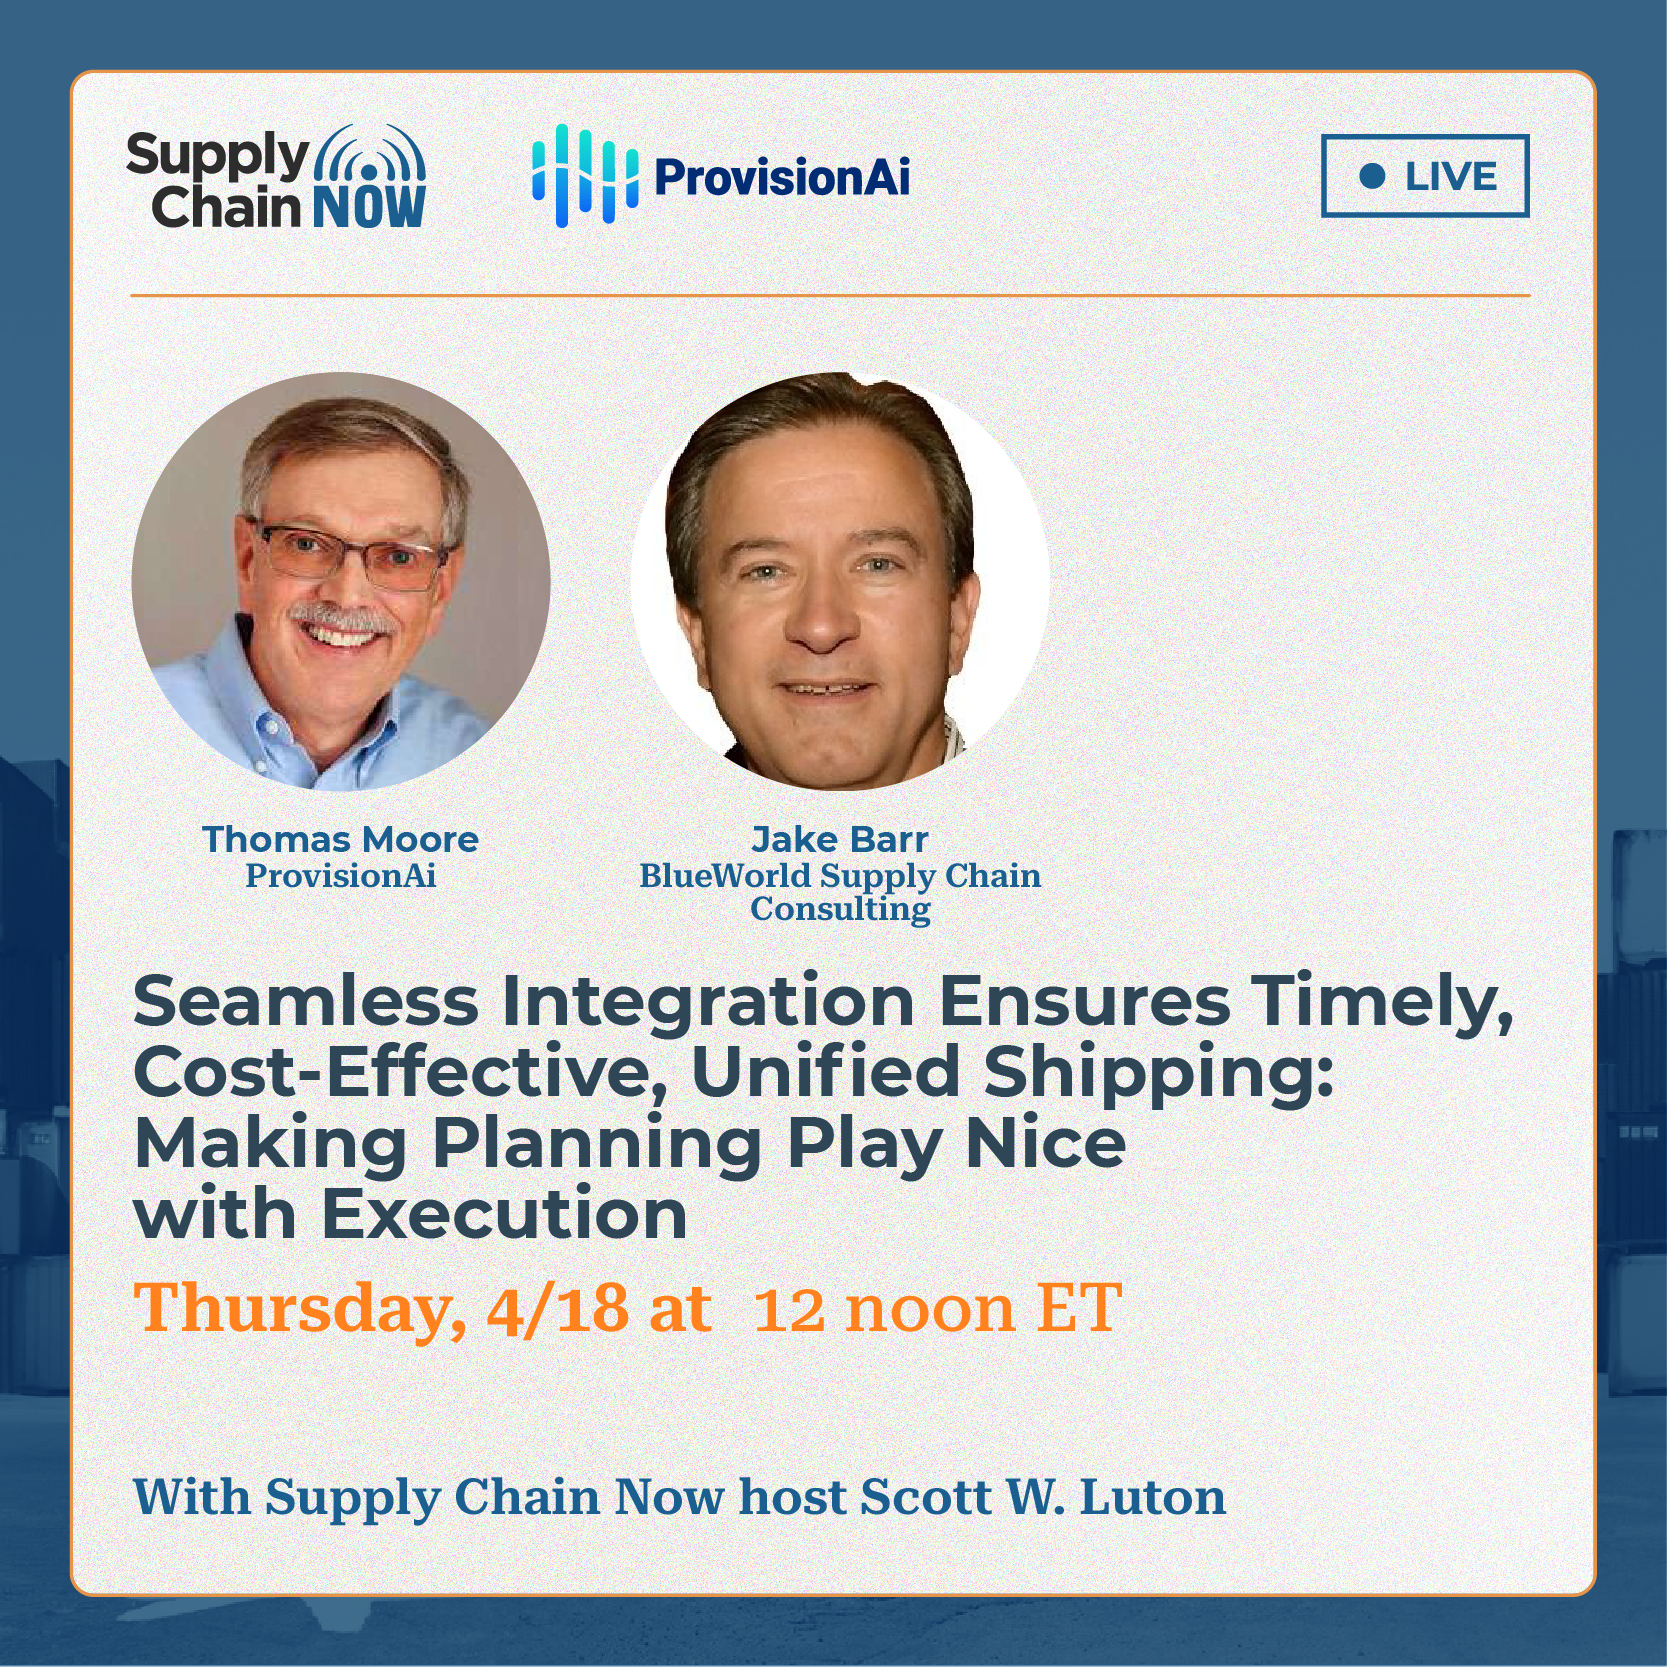 Supply Chain Now Live Stream April 18 Noon EST